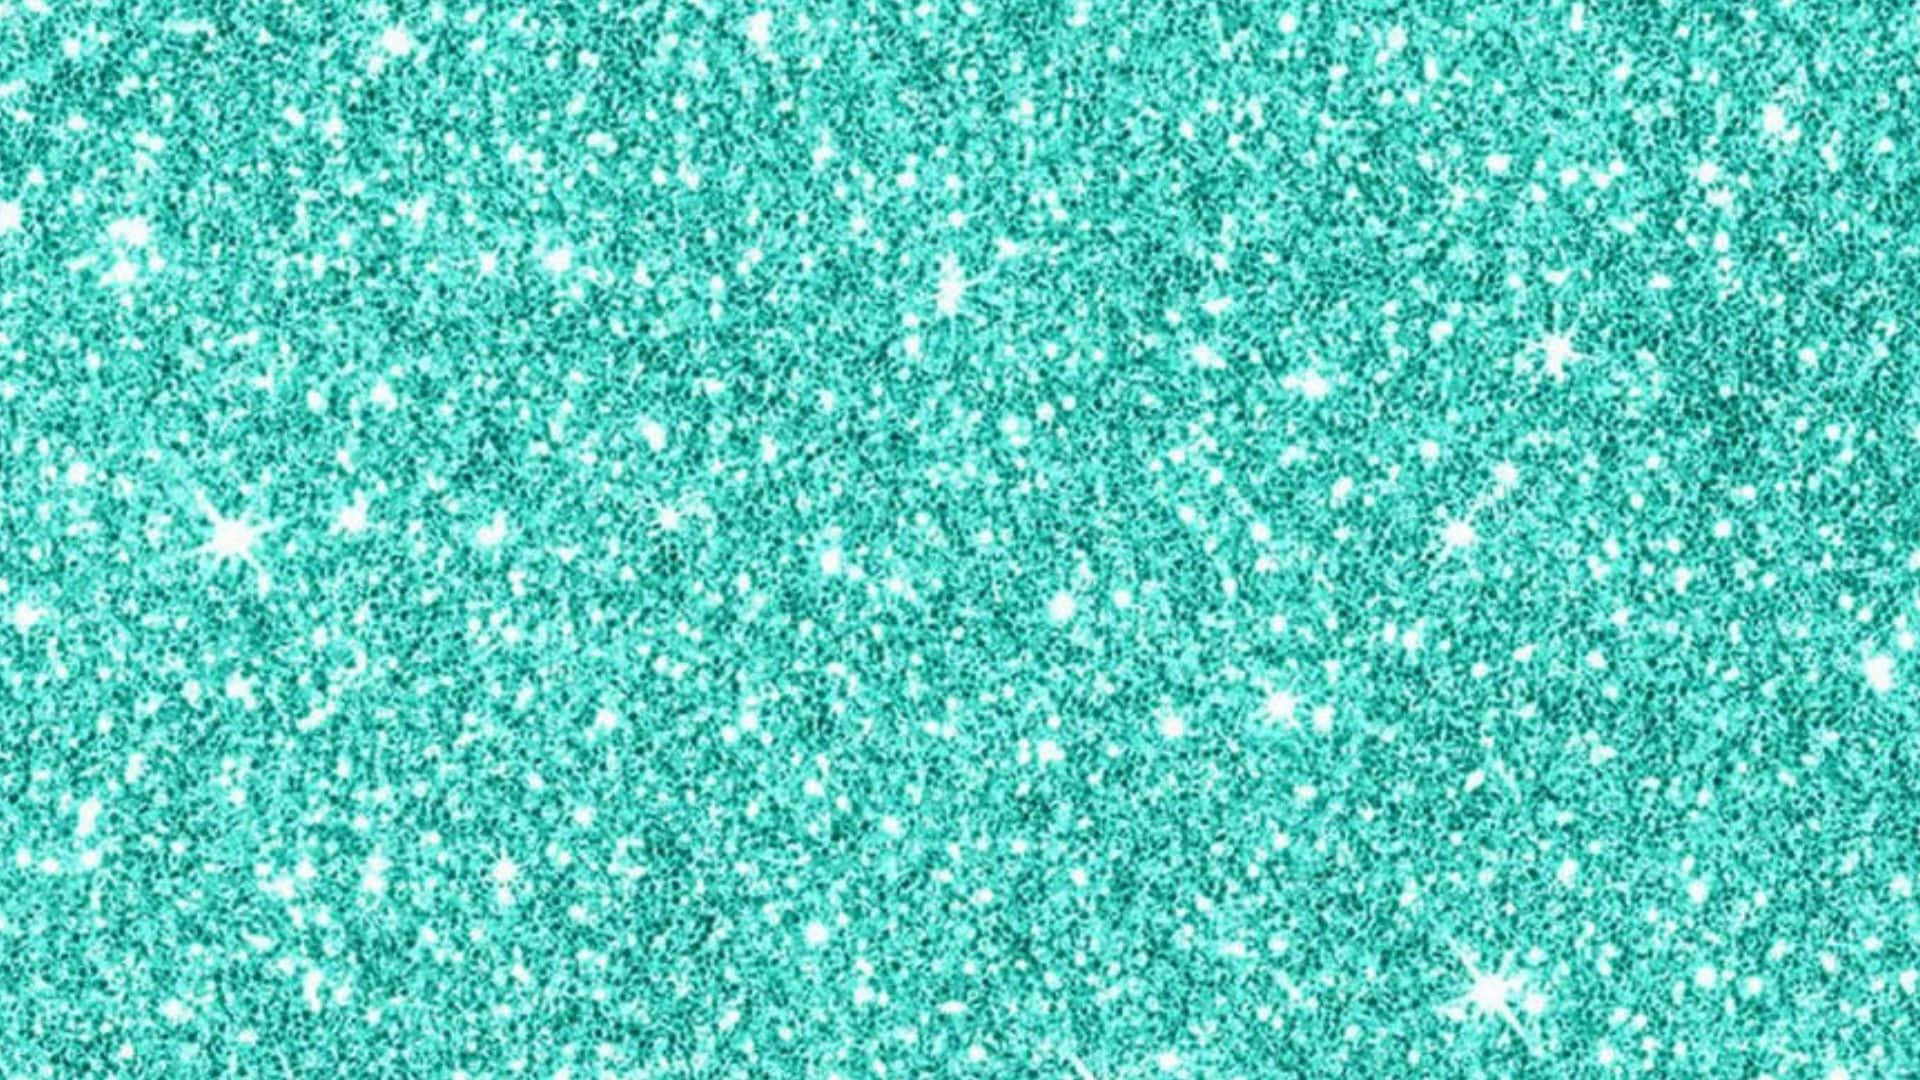 Sparkling Glittery Delight - High Resolution Background